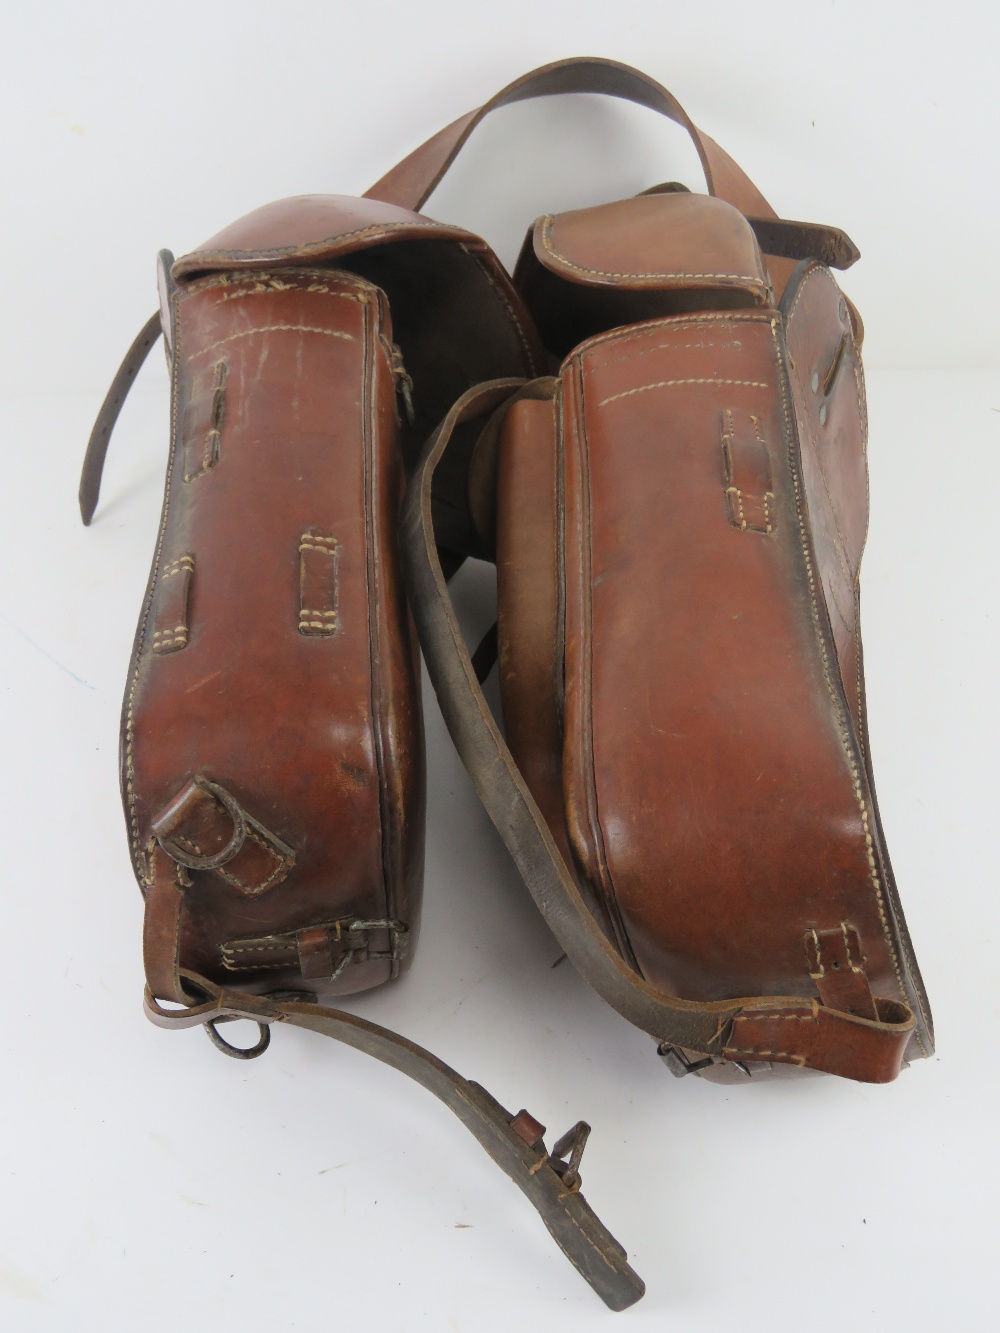 WWII German Cavalry saddle bags, Wersa 1941 Munchen. - Image 5 of 5